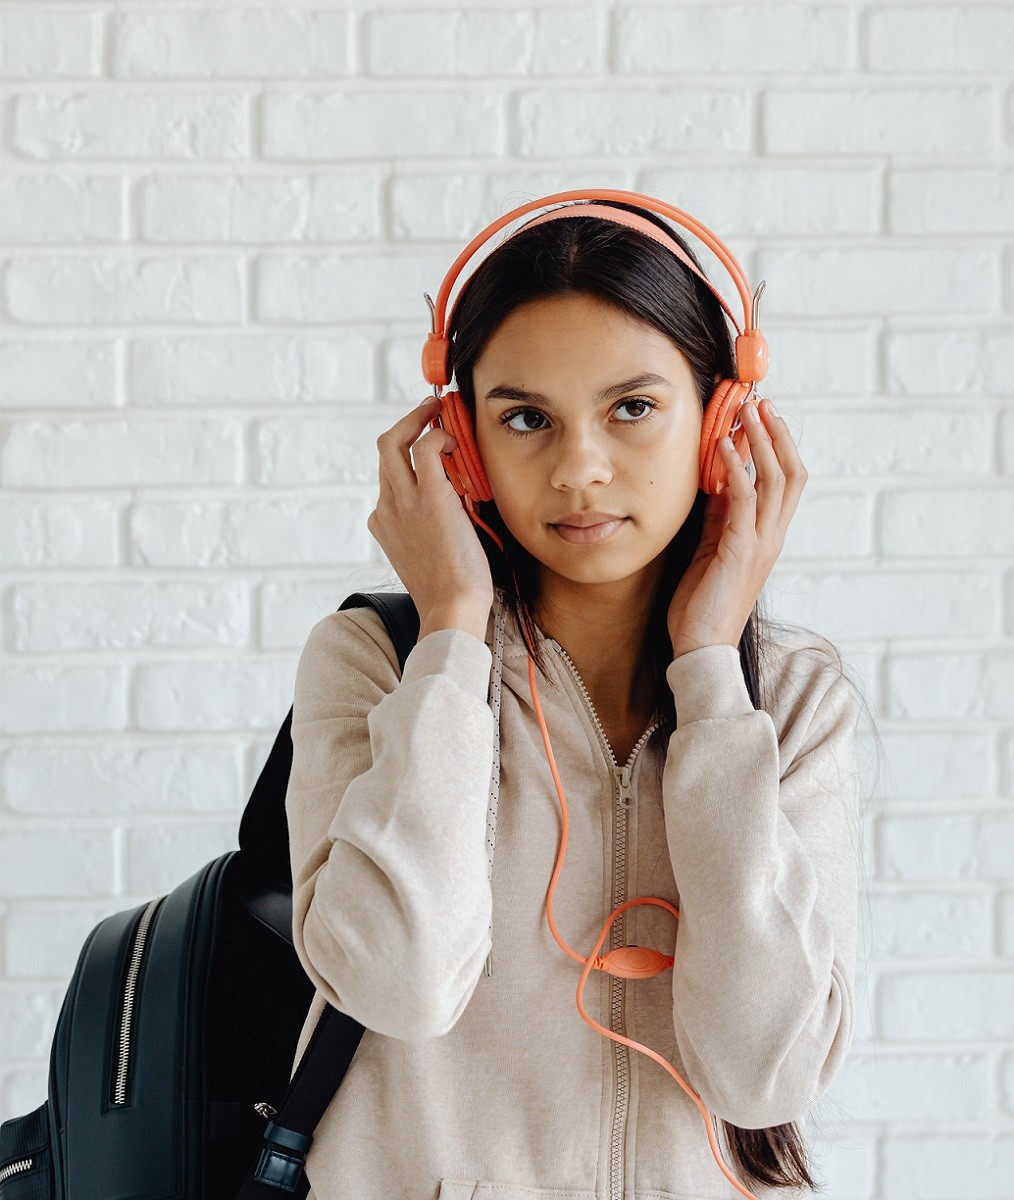 female student with backpack listening to music through headphones